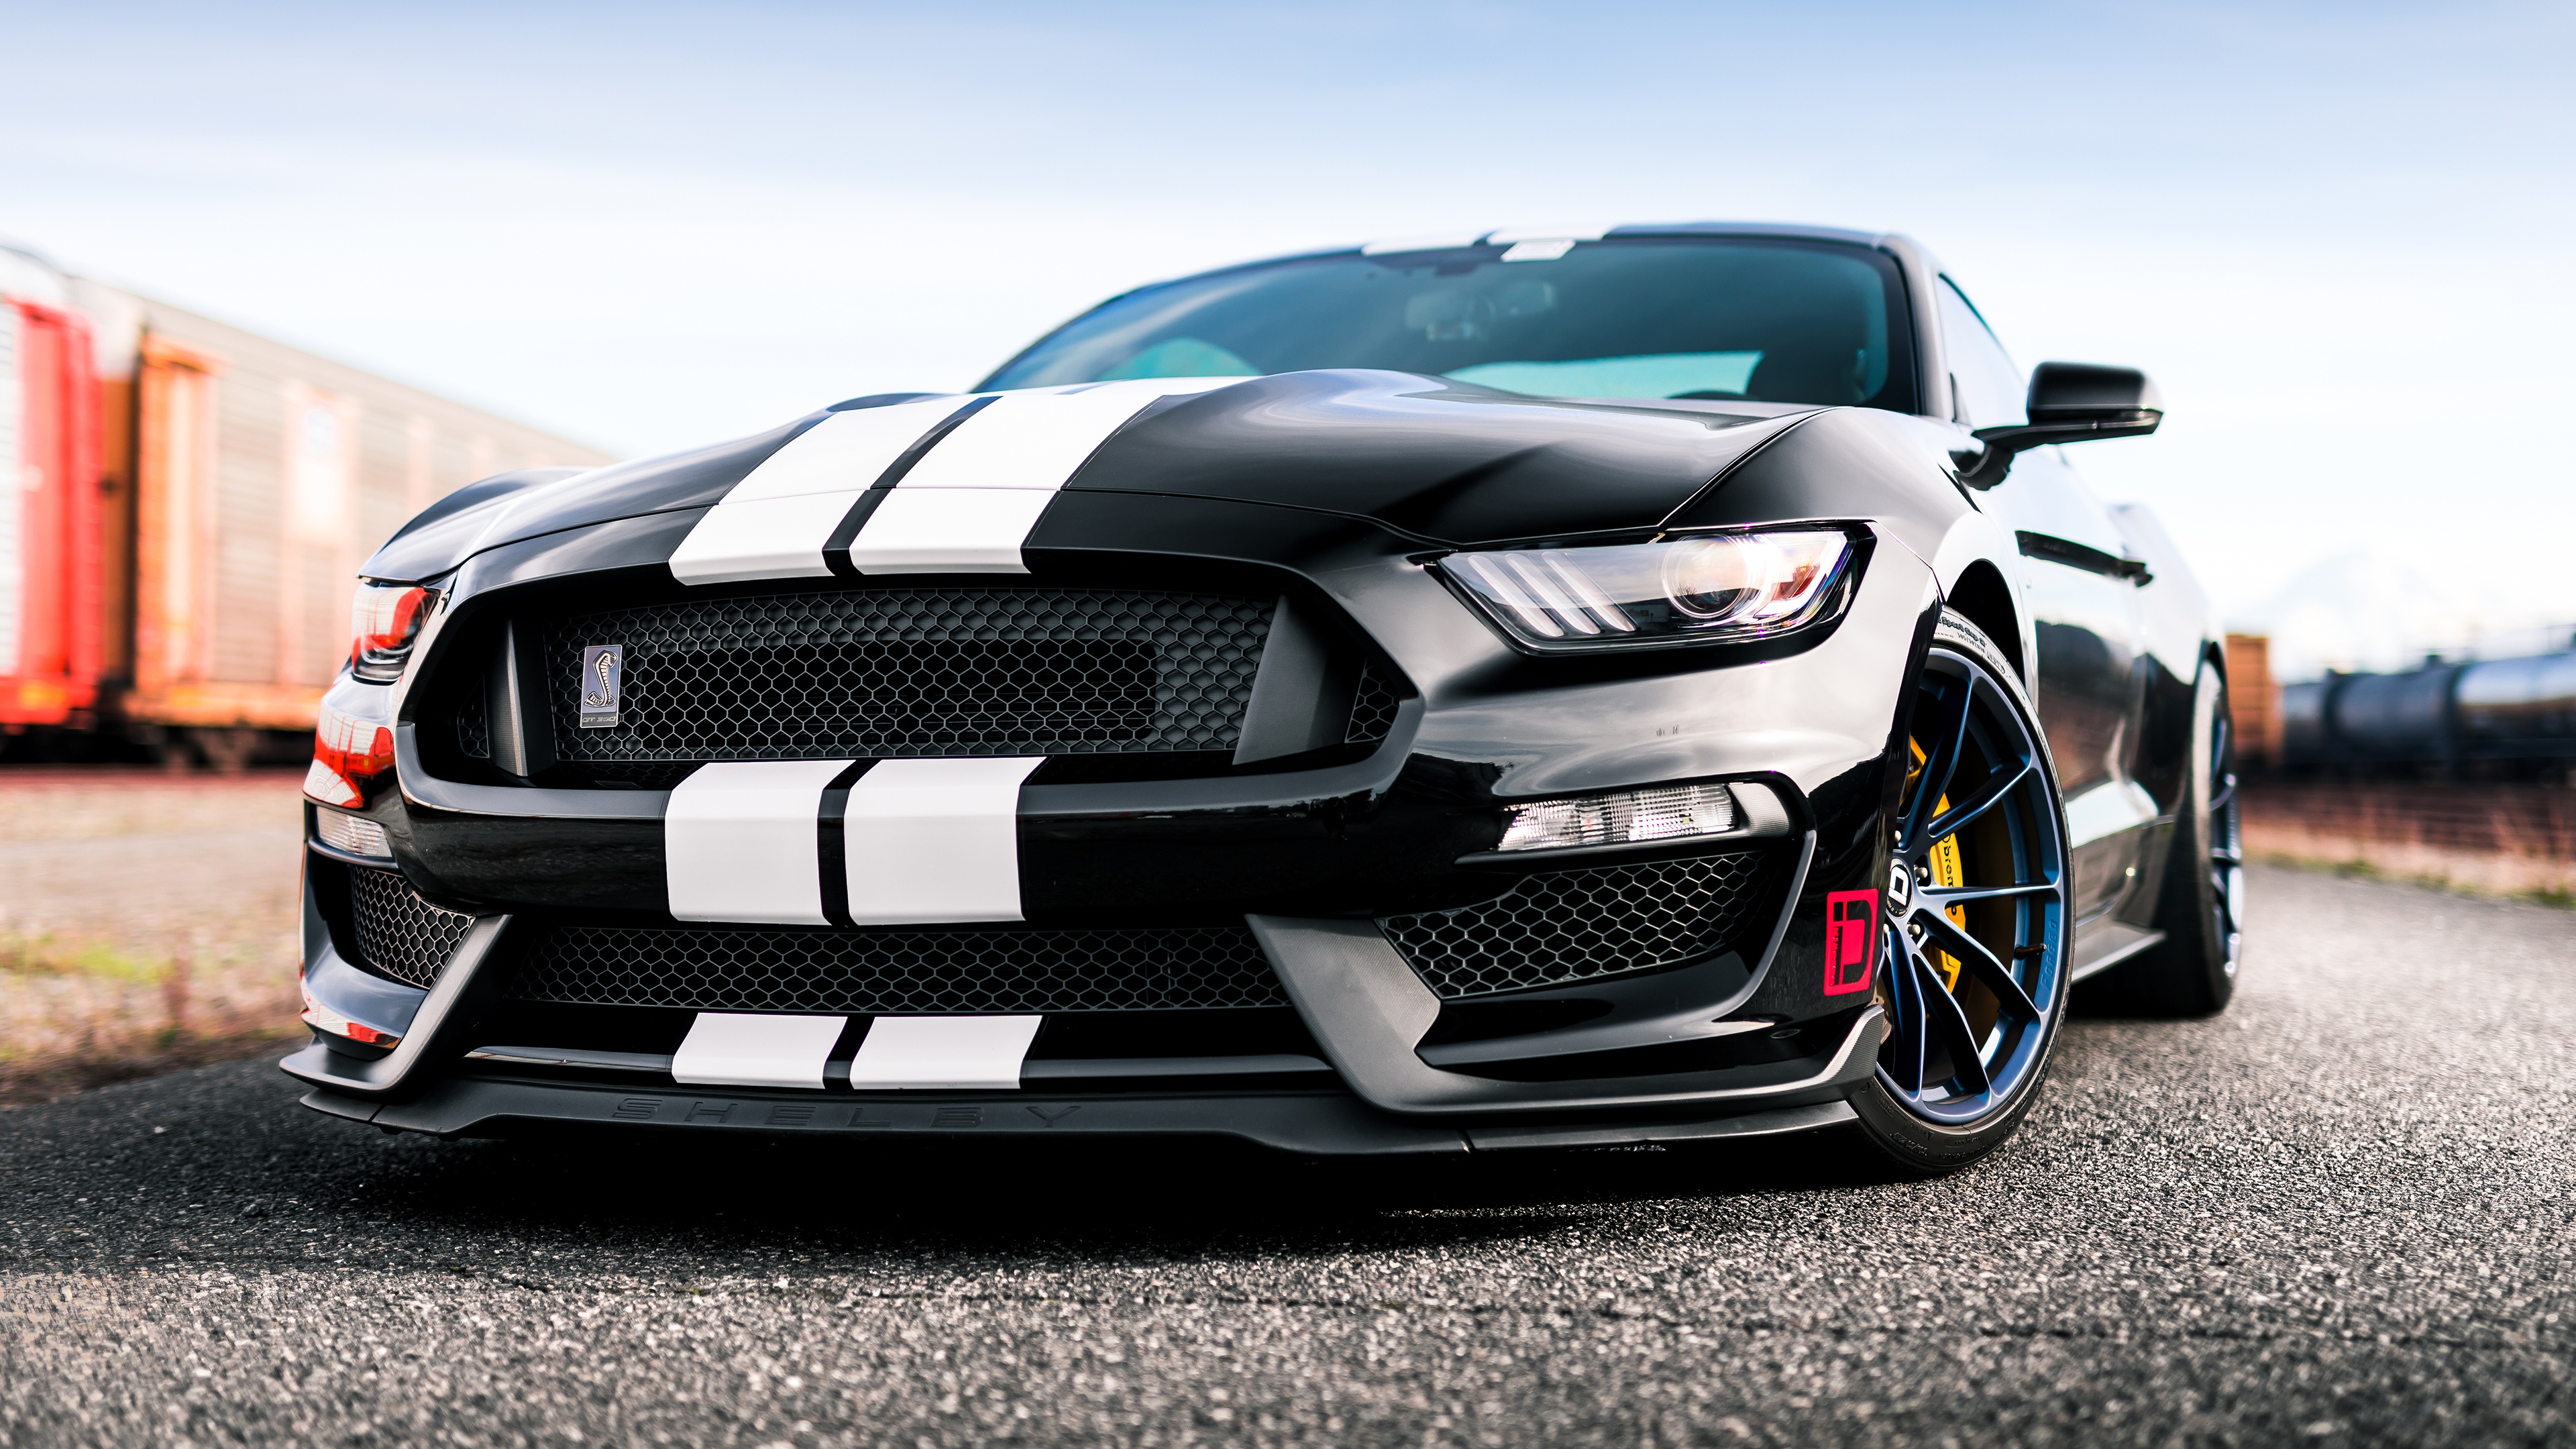 Shelby Mustang Gt 350 Wallpapers